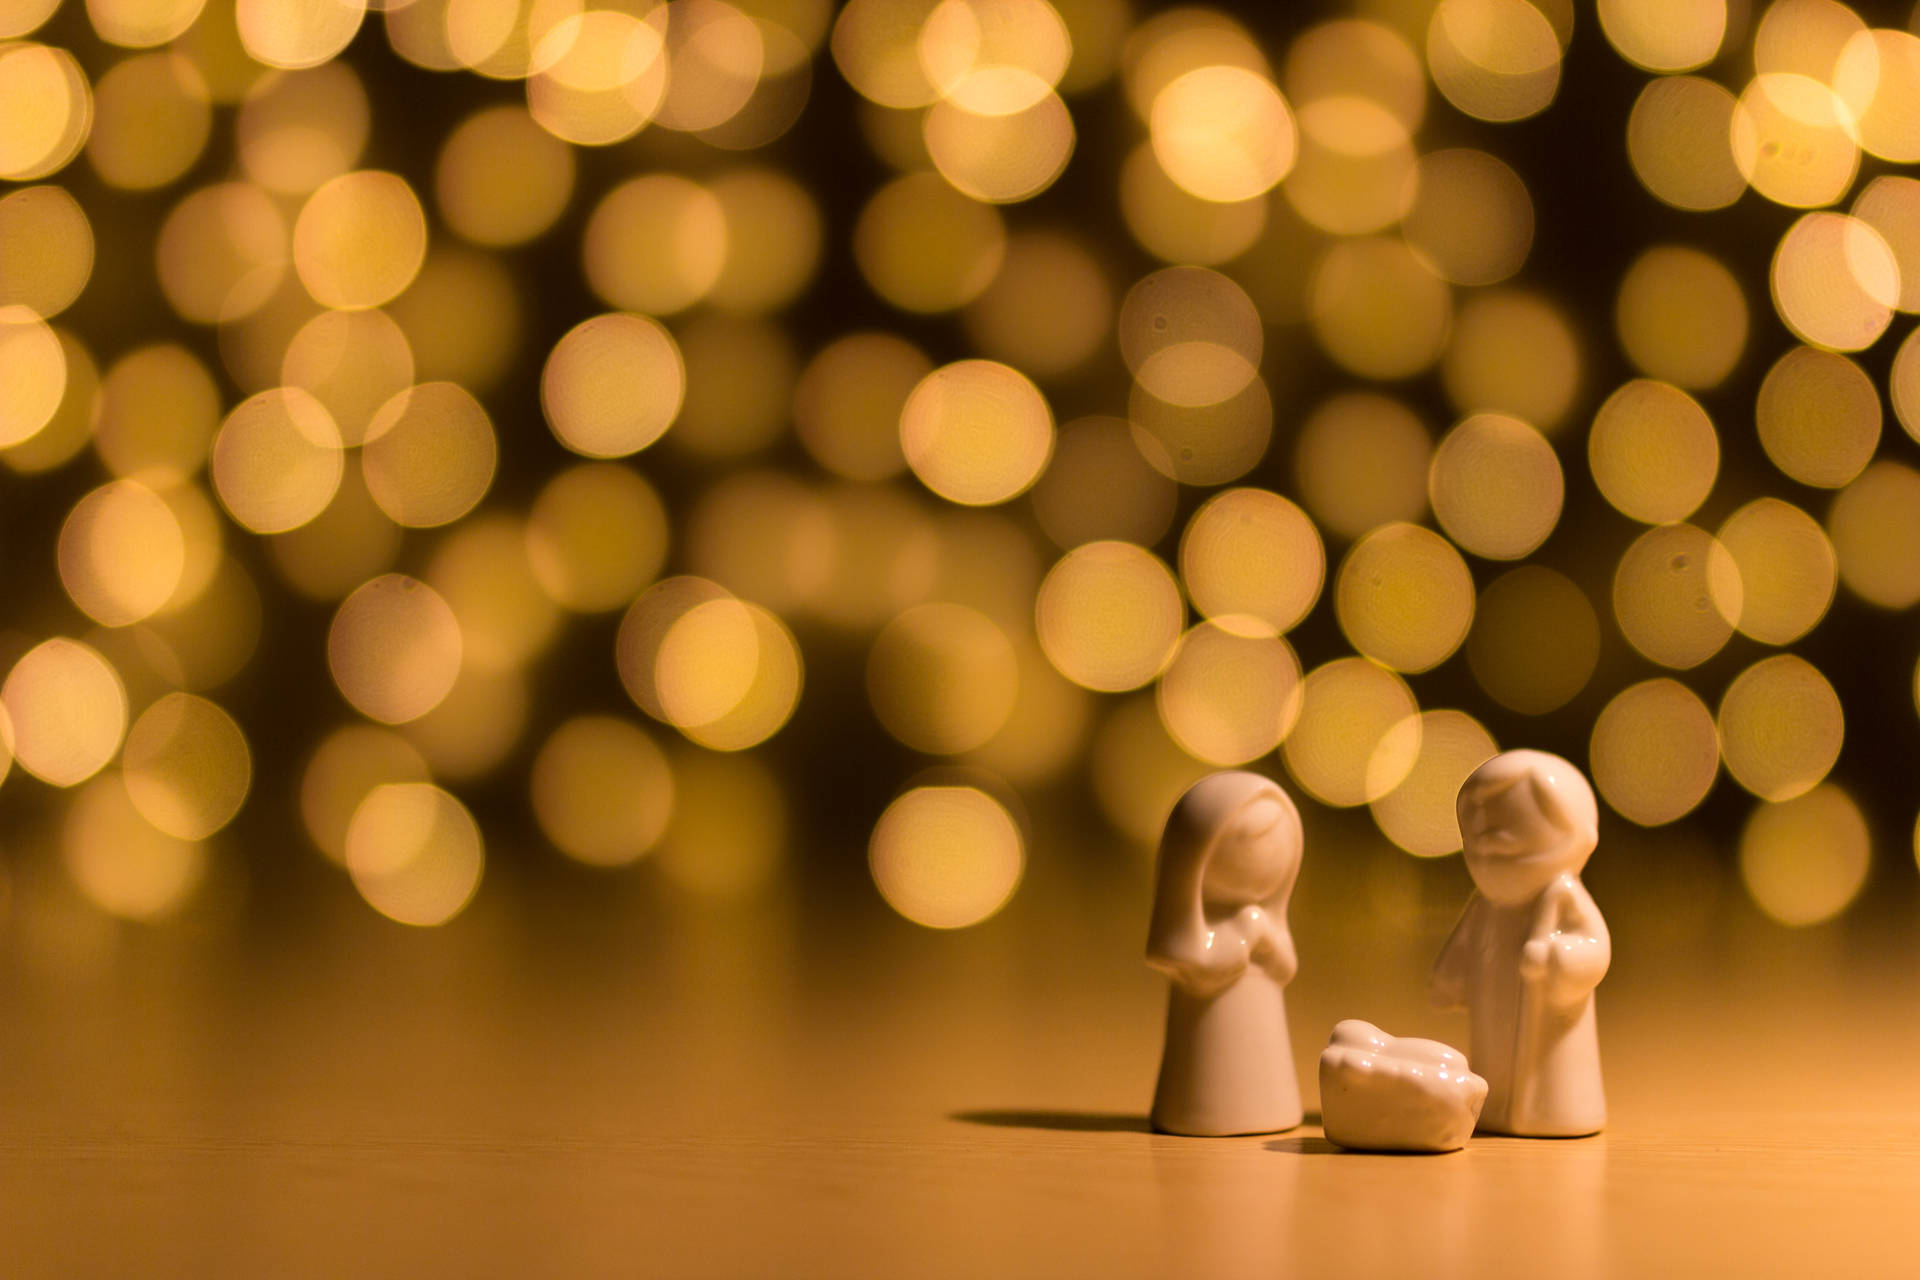 Celebrate the True Meaning of Christmas with This Adorable Holy Family Wallpaper